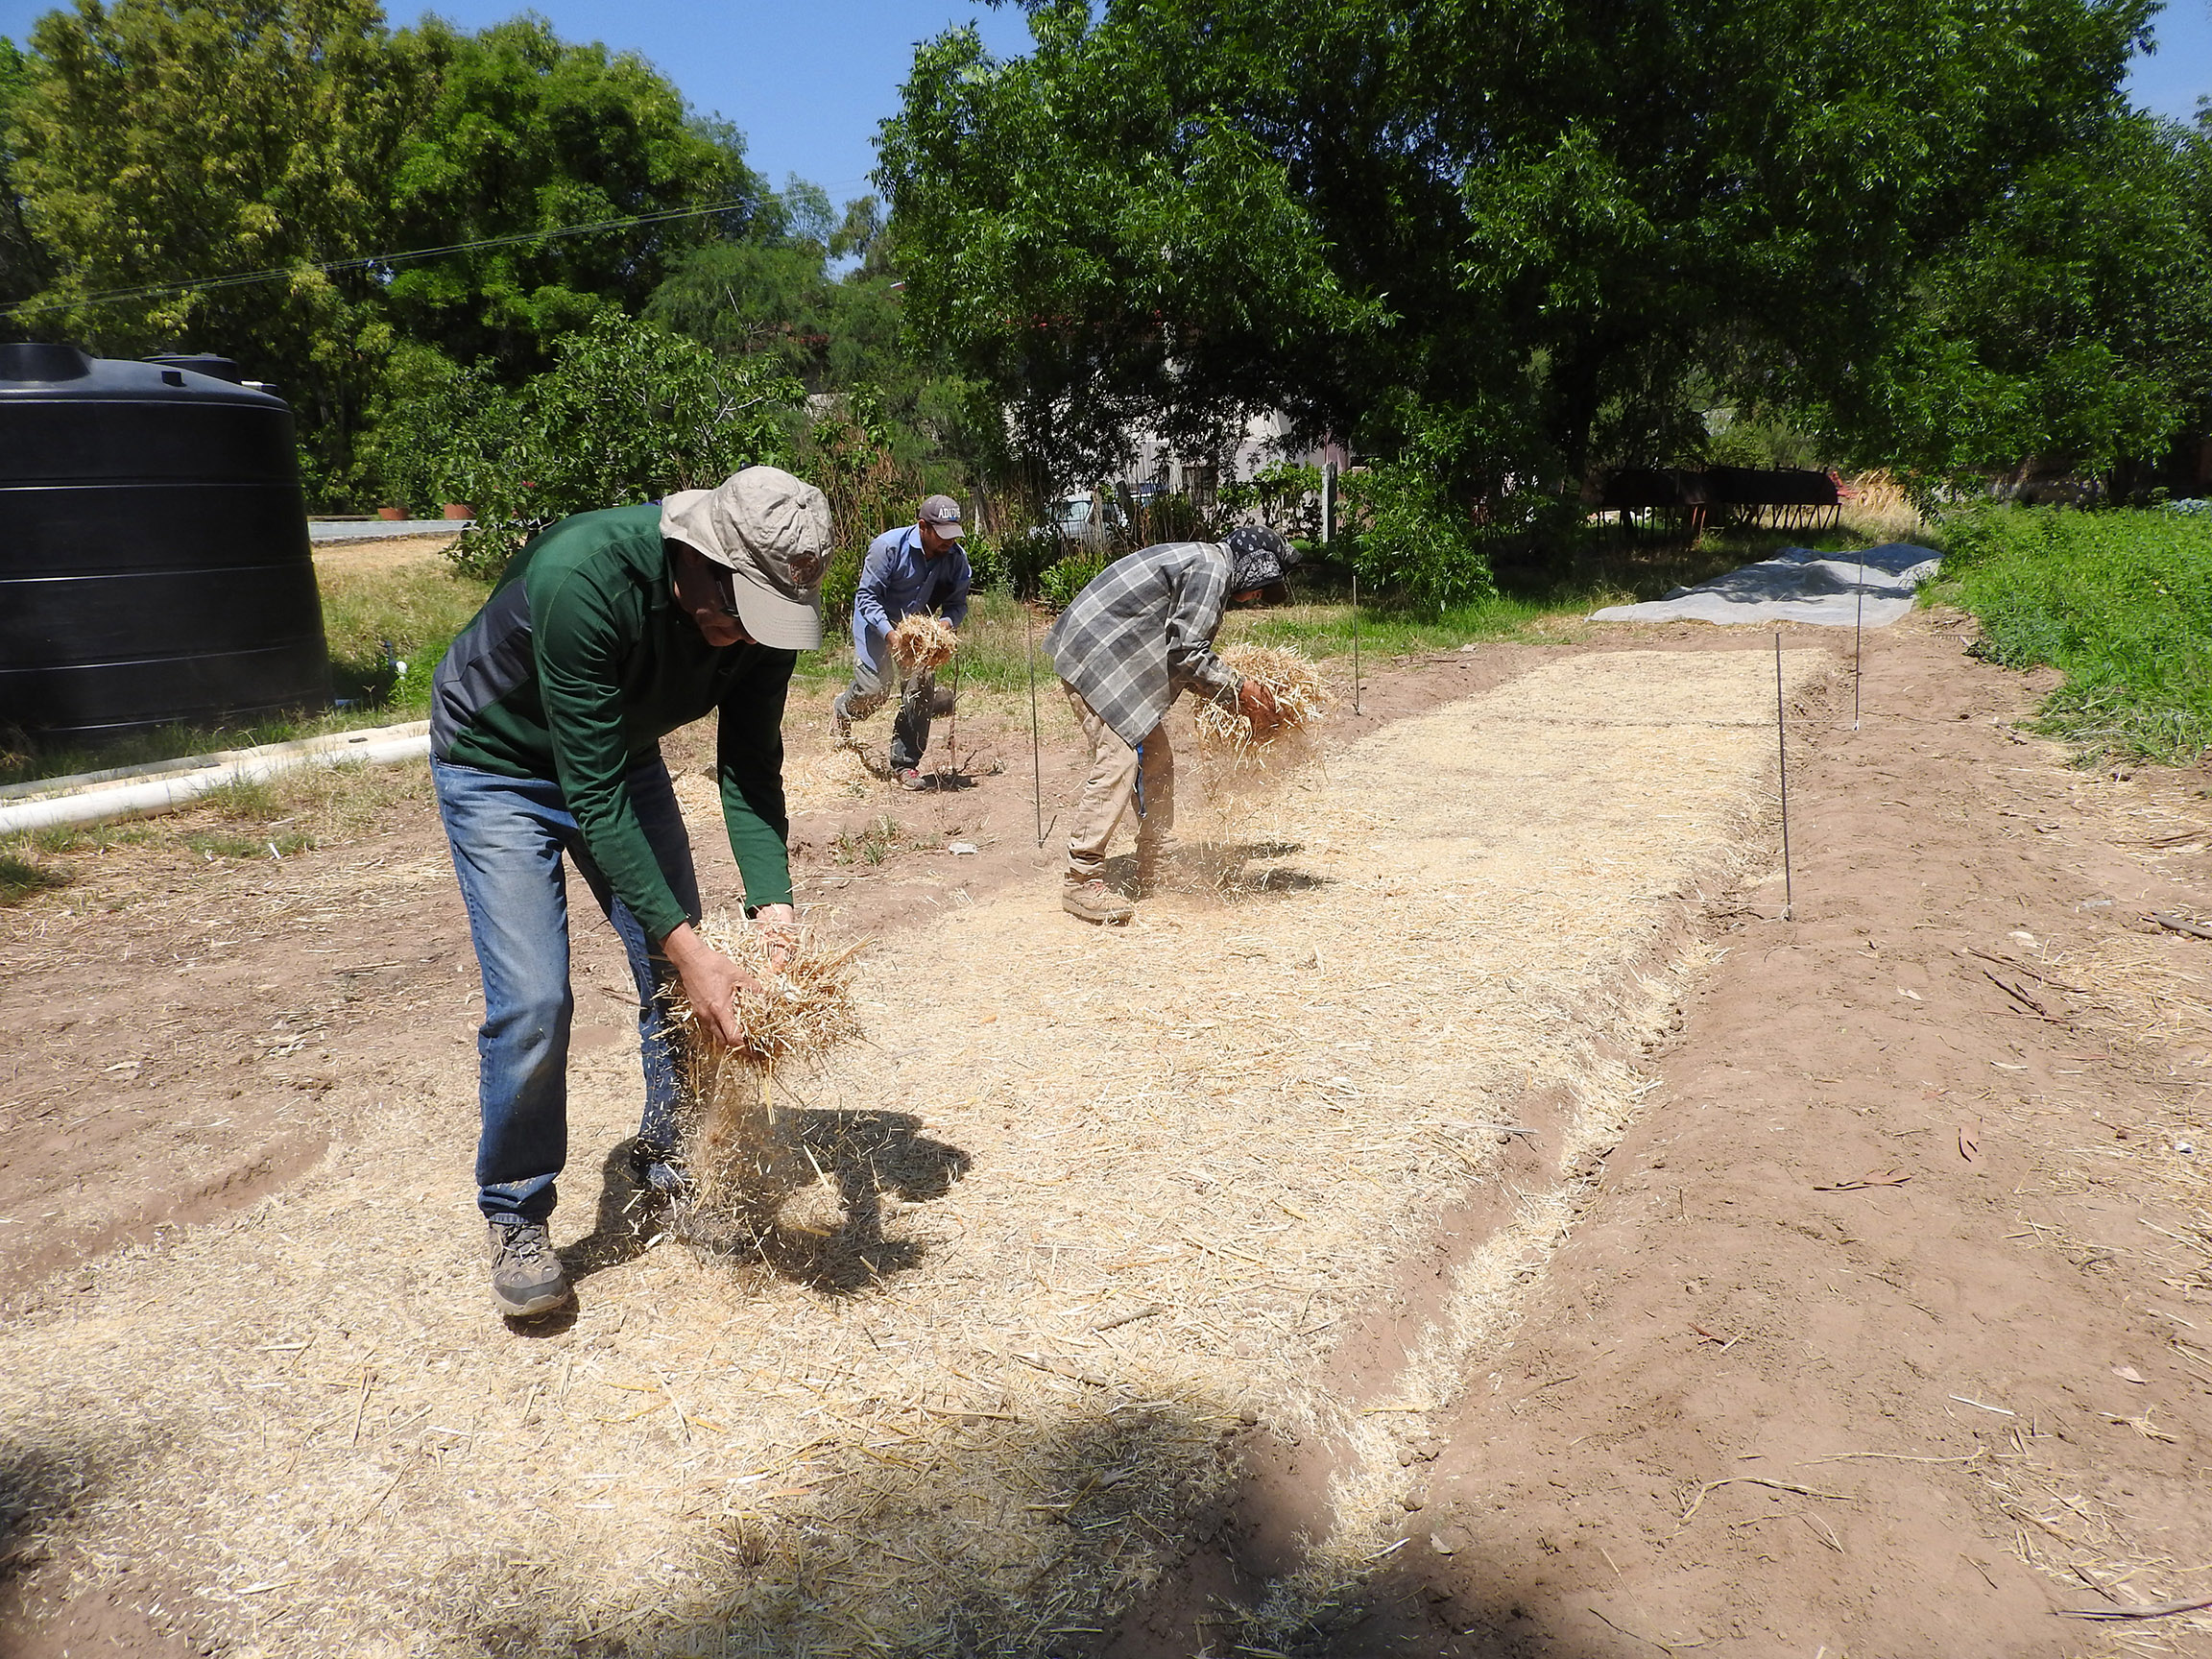 THree men work in the sunshine to scatter chopped straw over the newly seeded soil.